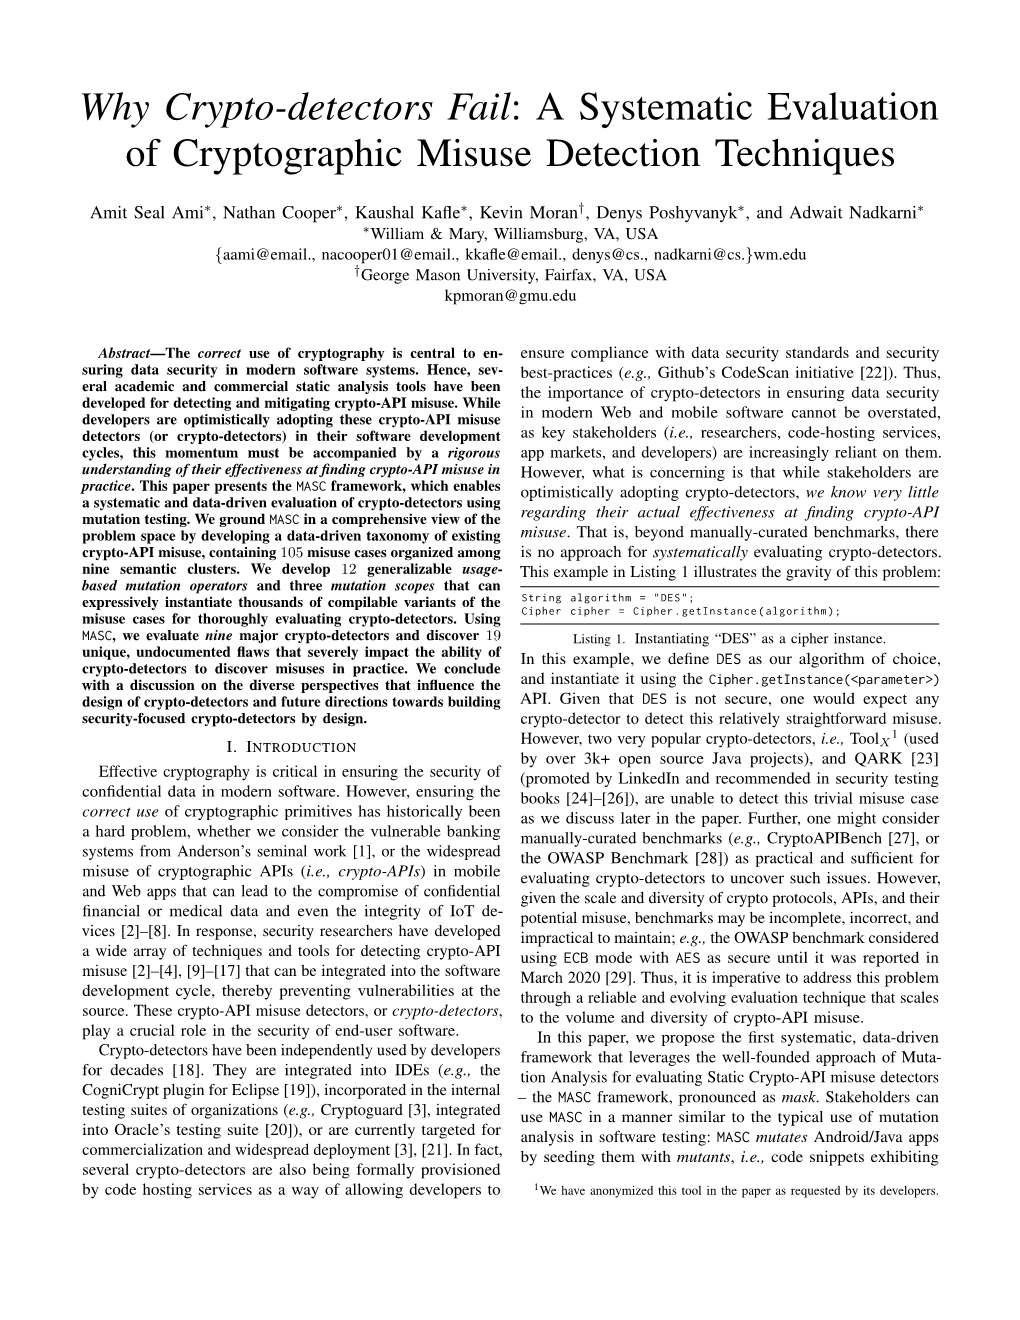 Why Crypto-Detectors Fail: a Systematic Evaluation of Cryptographic Misuse Detection Techniques